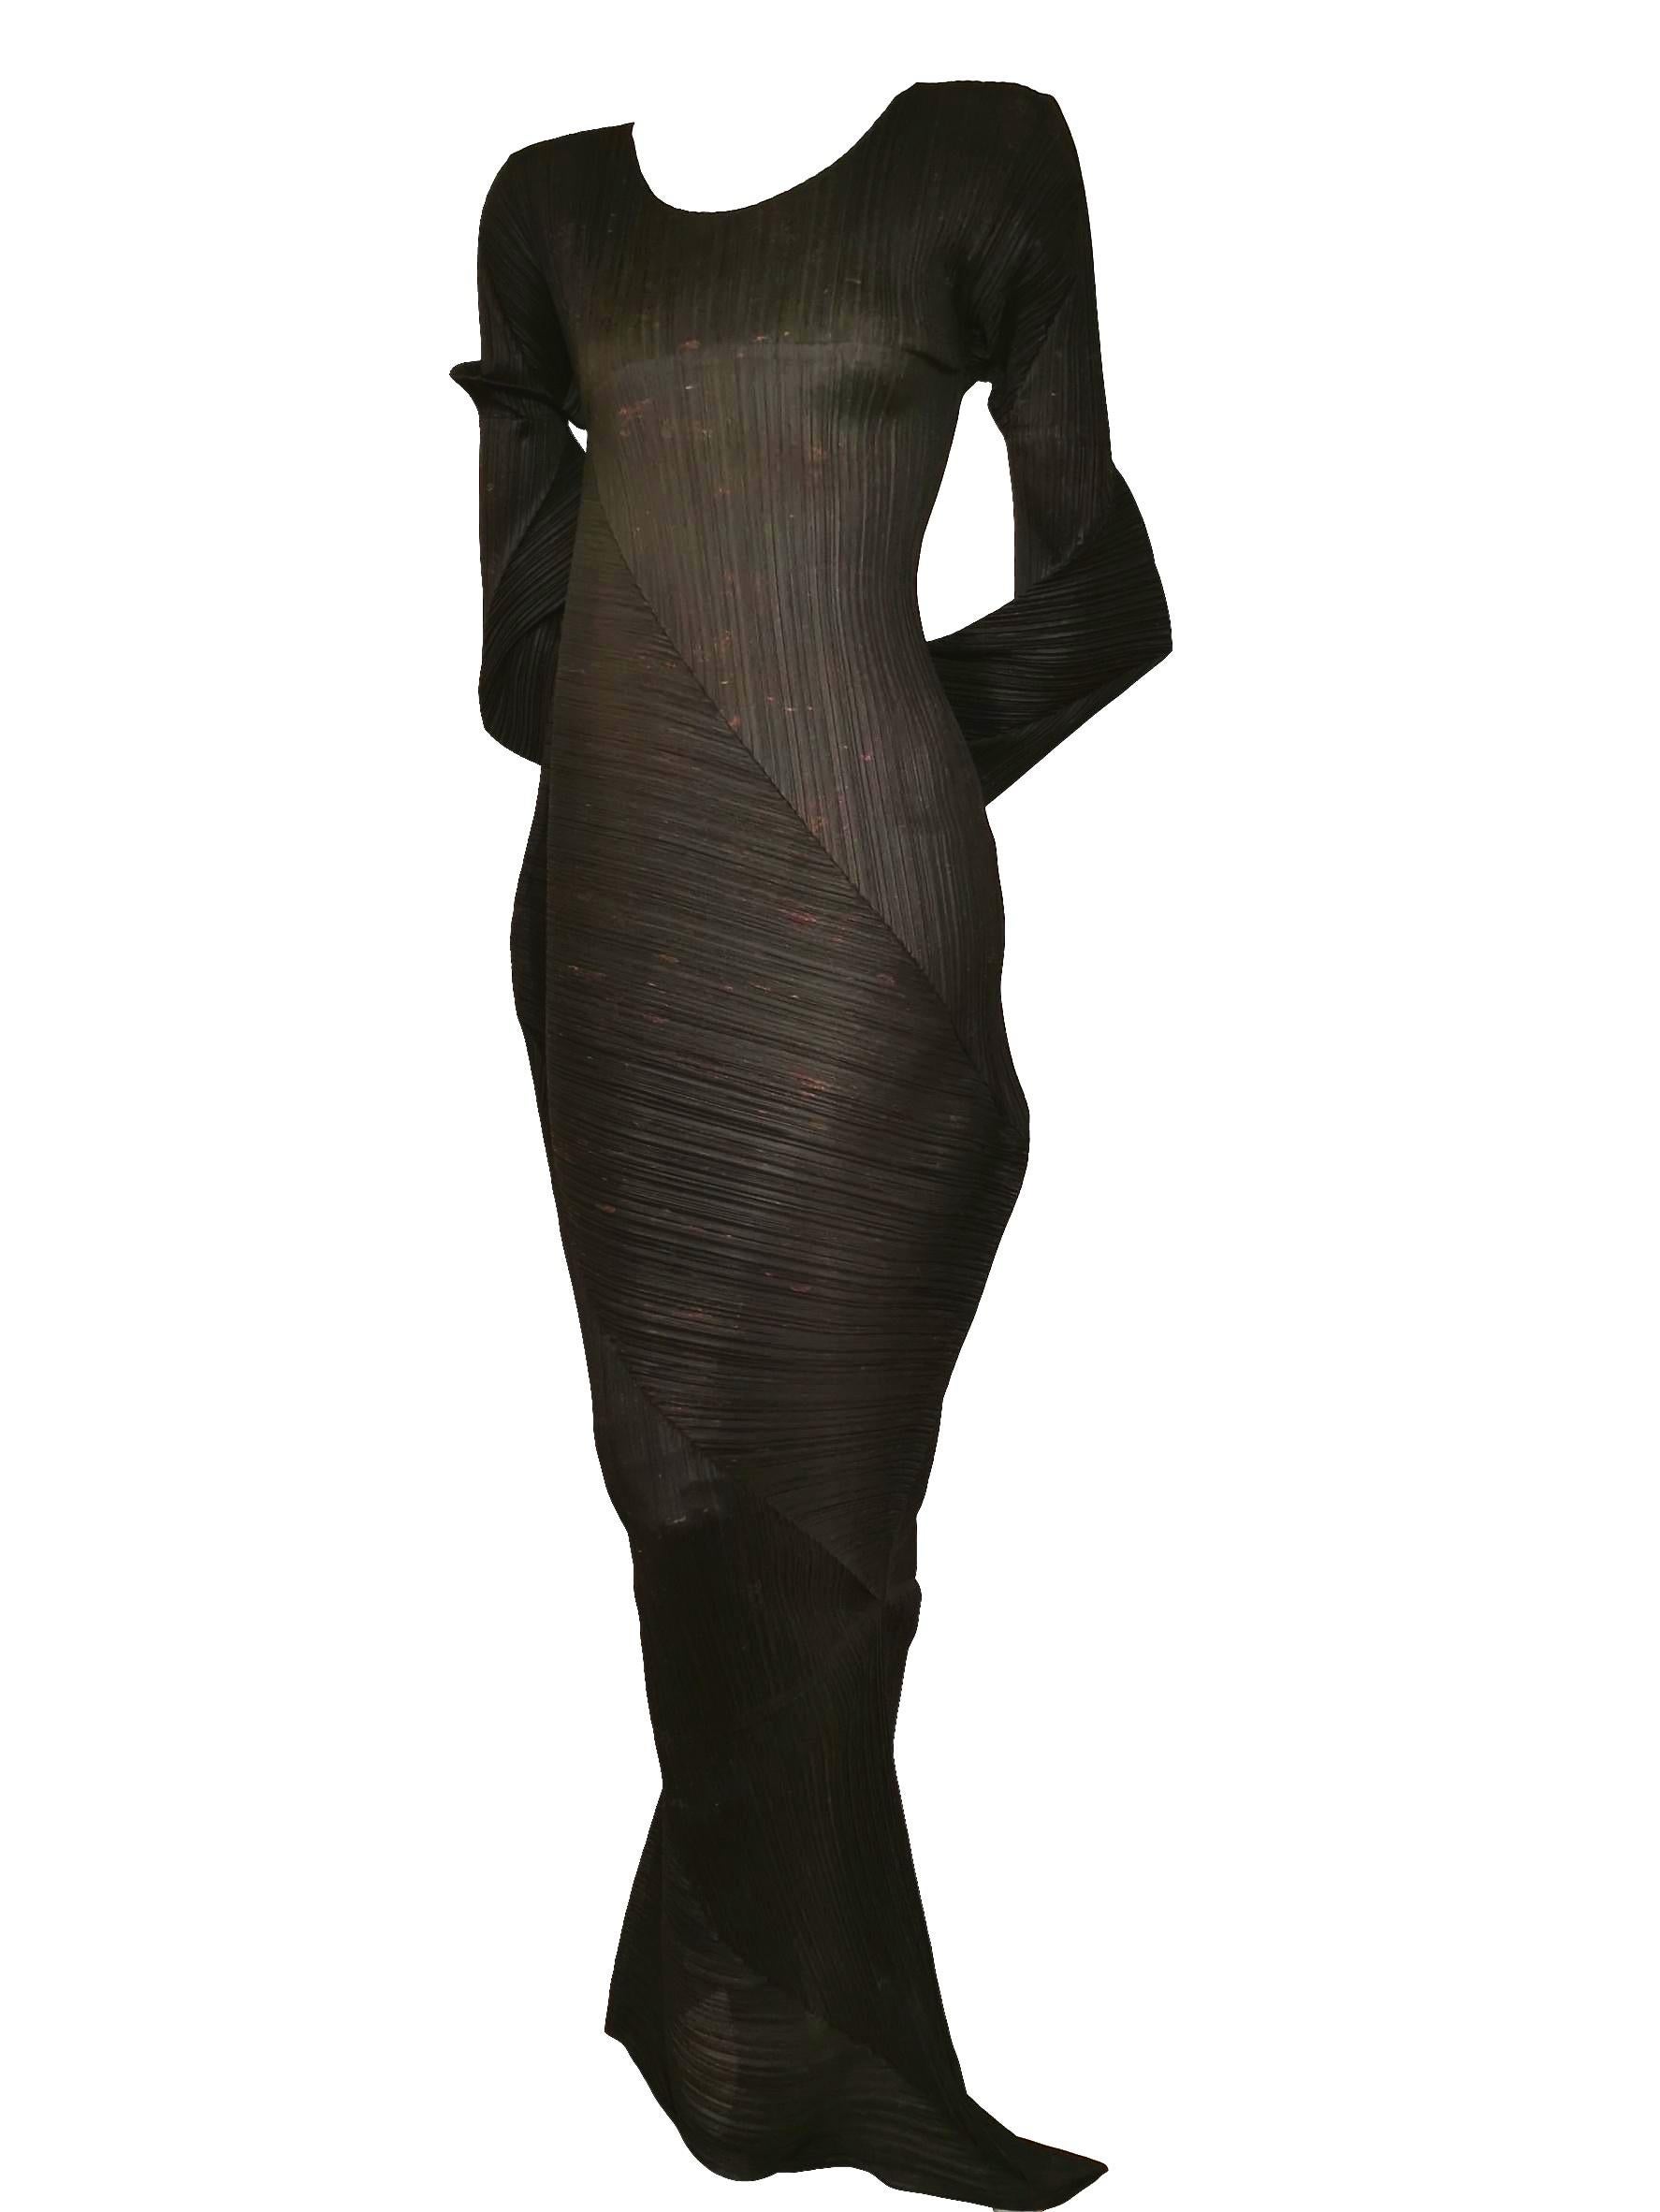 Issey Miyake Guest Artist Cai Guo Qiang Series Number 4 Serpentine Dress For Sale 5